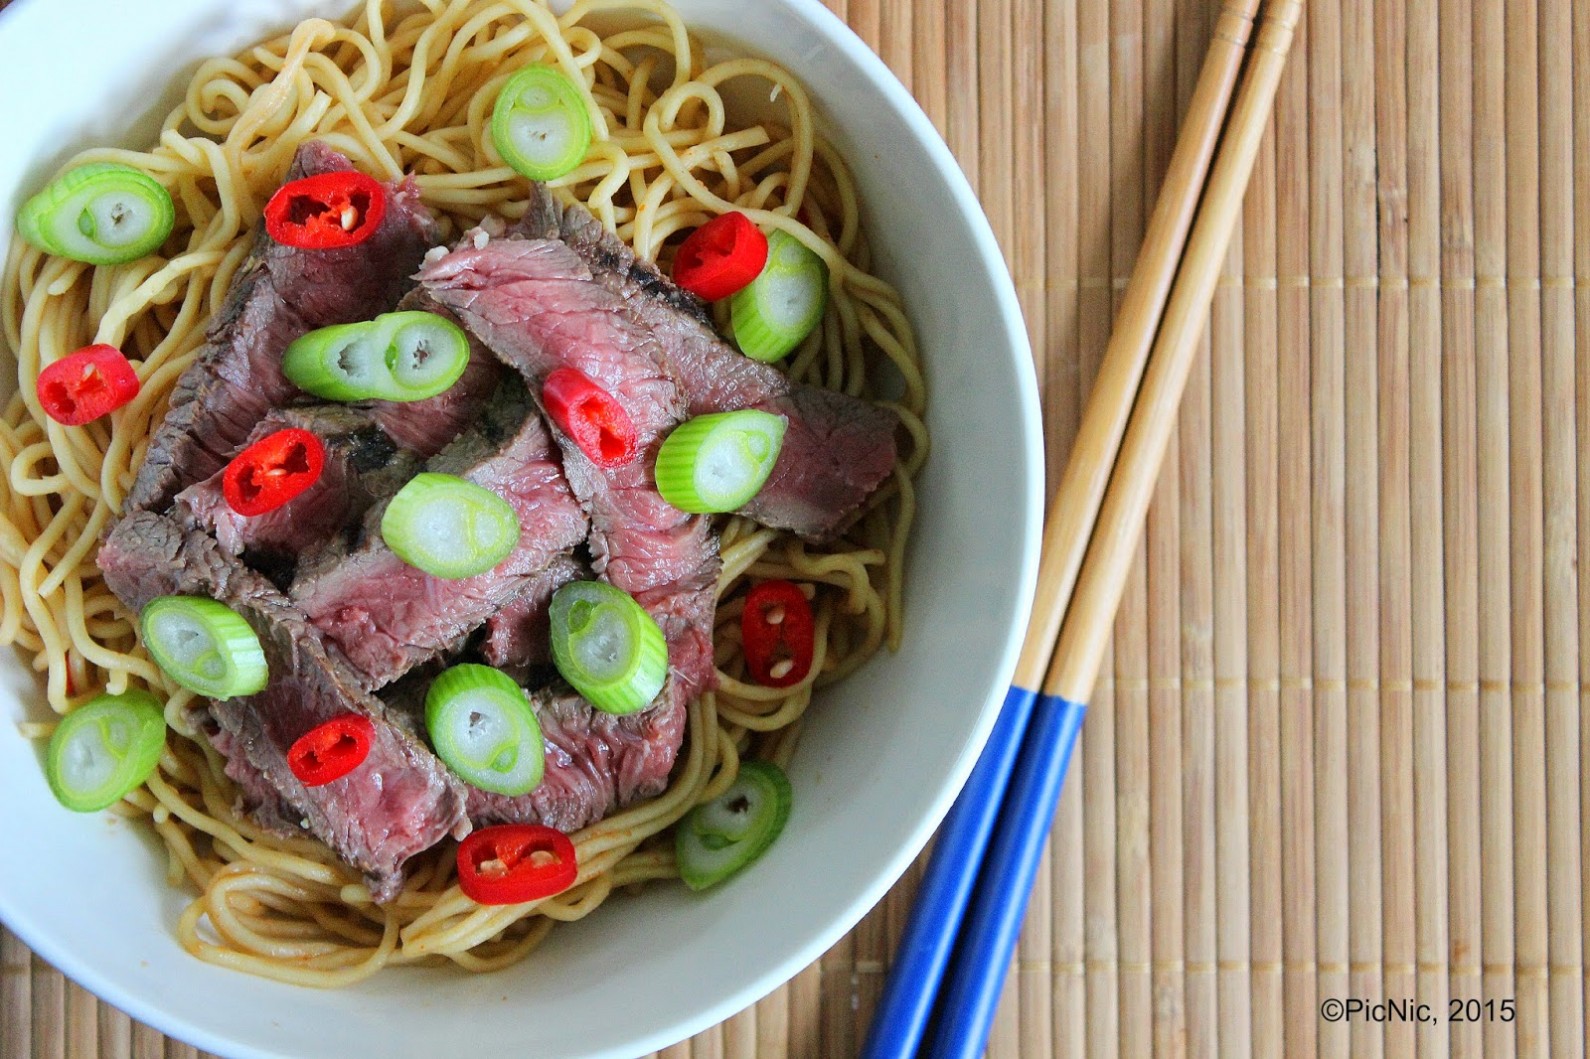 Chili and Garlic Beef Noodles